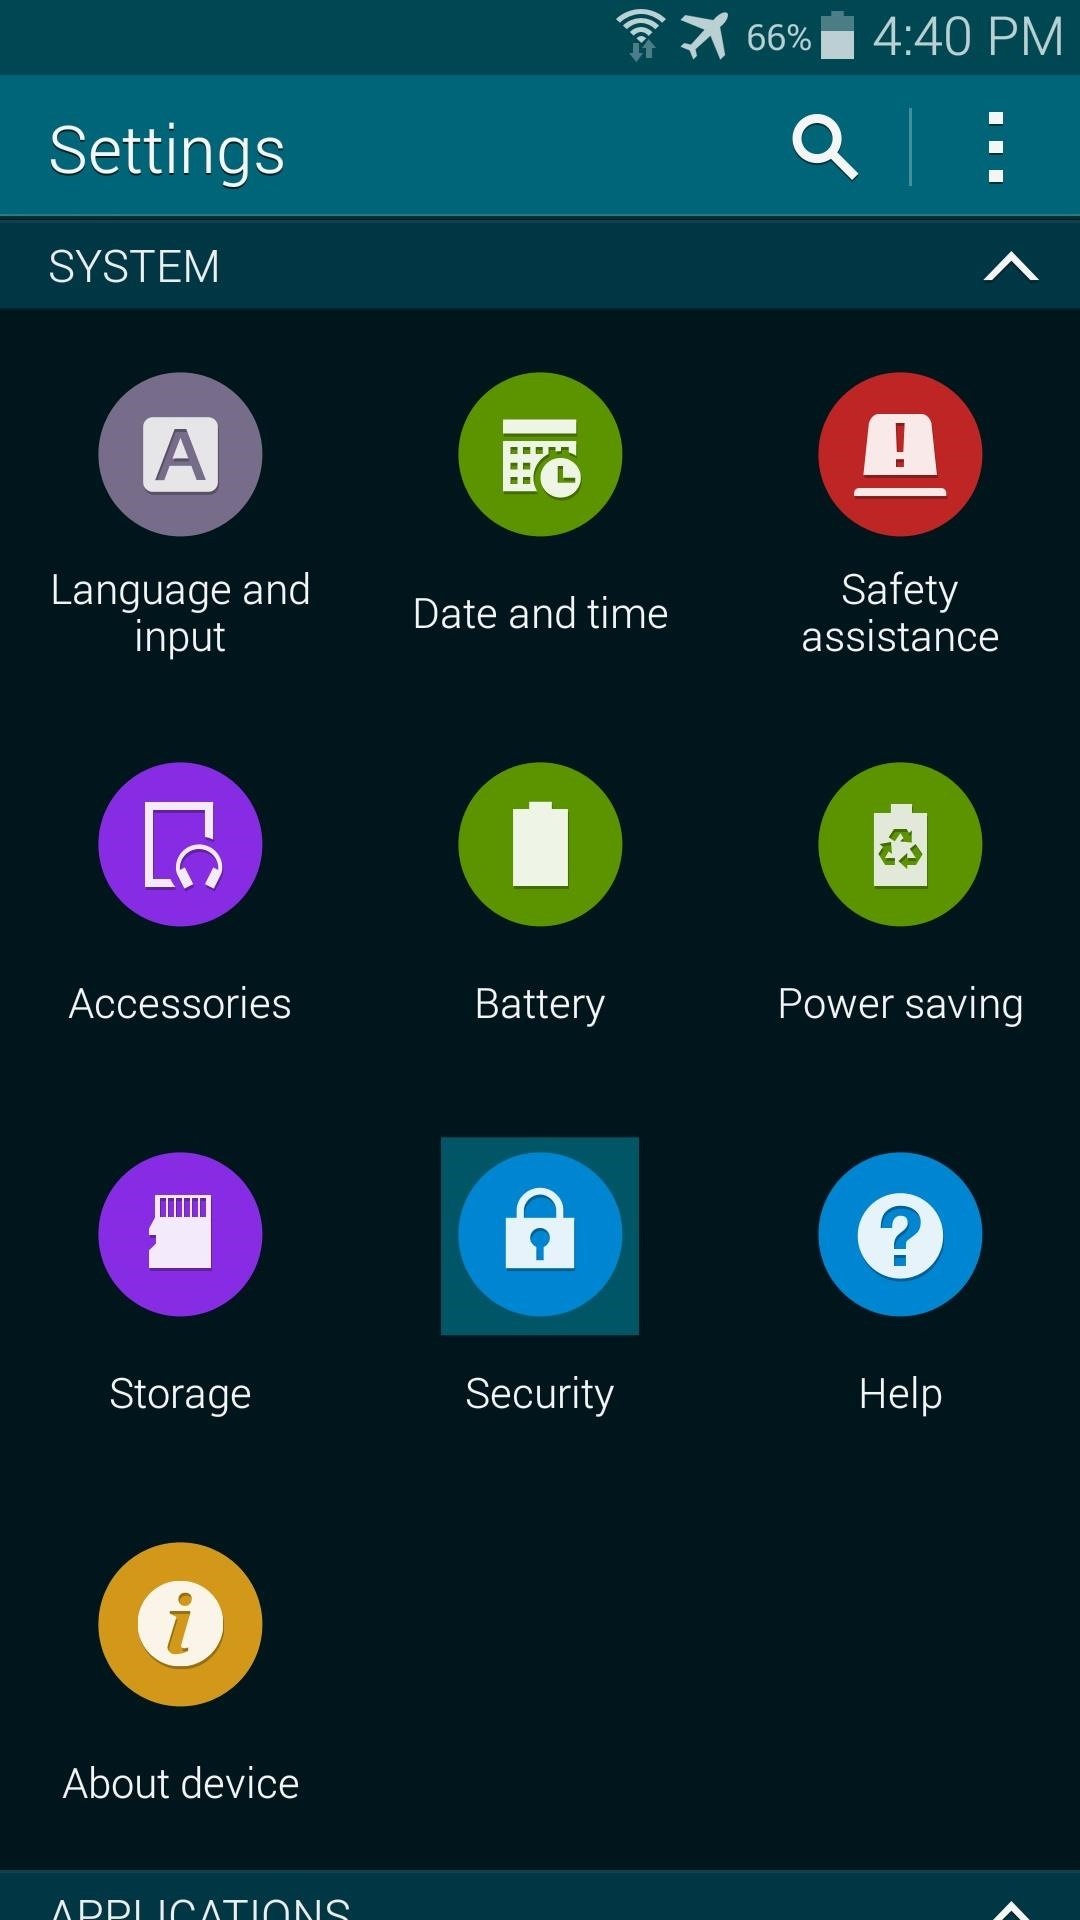 How to Install the Xposed Framework on Your Samsung Galaxy S5